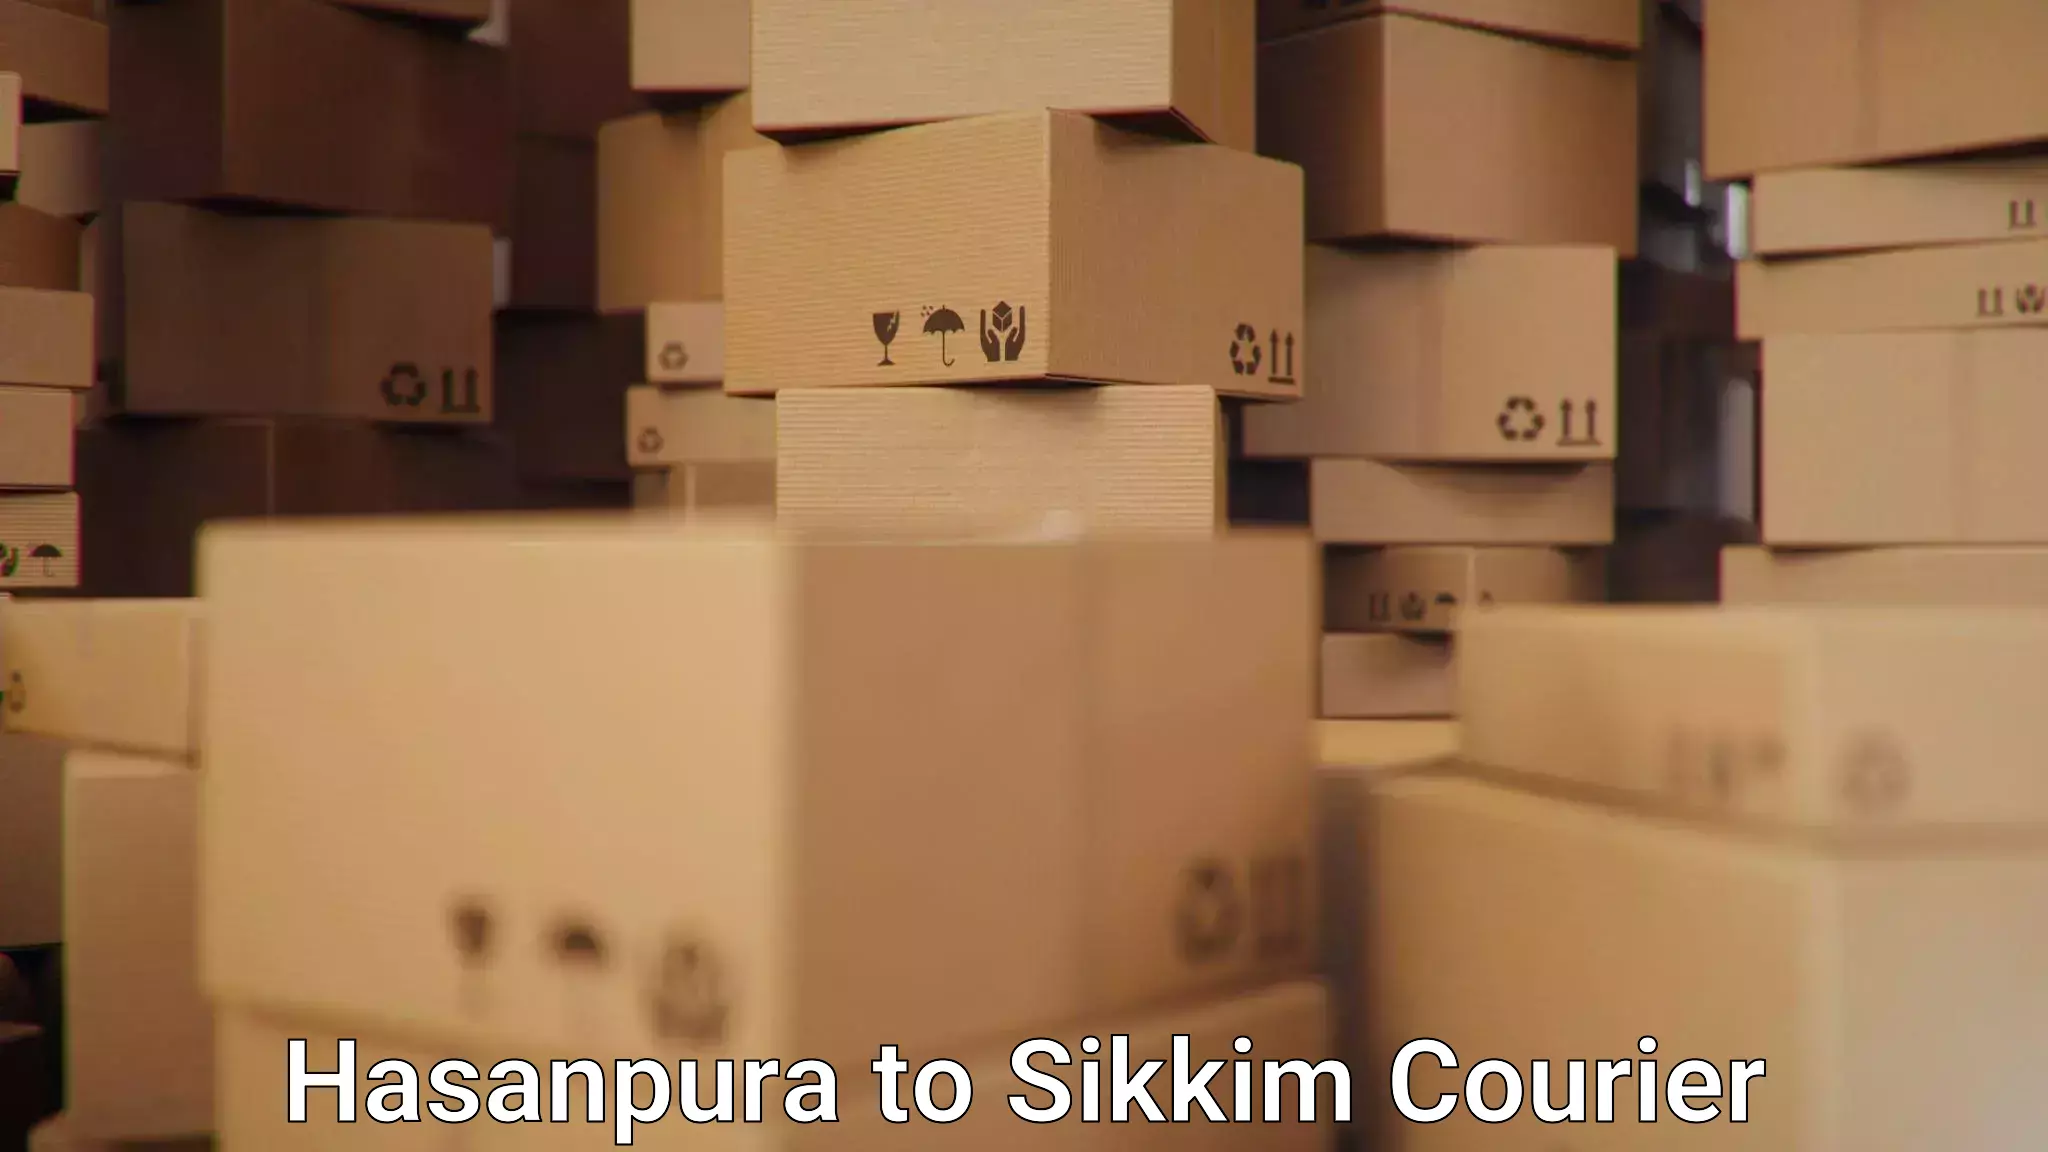 High-capacity parcel service Hasanpura to Sikkim